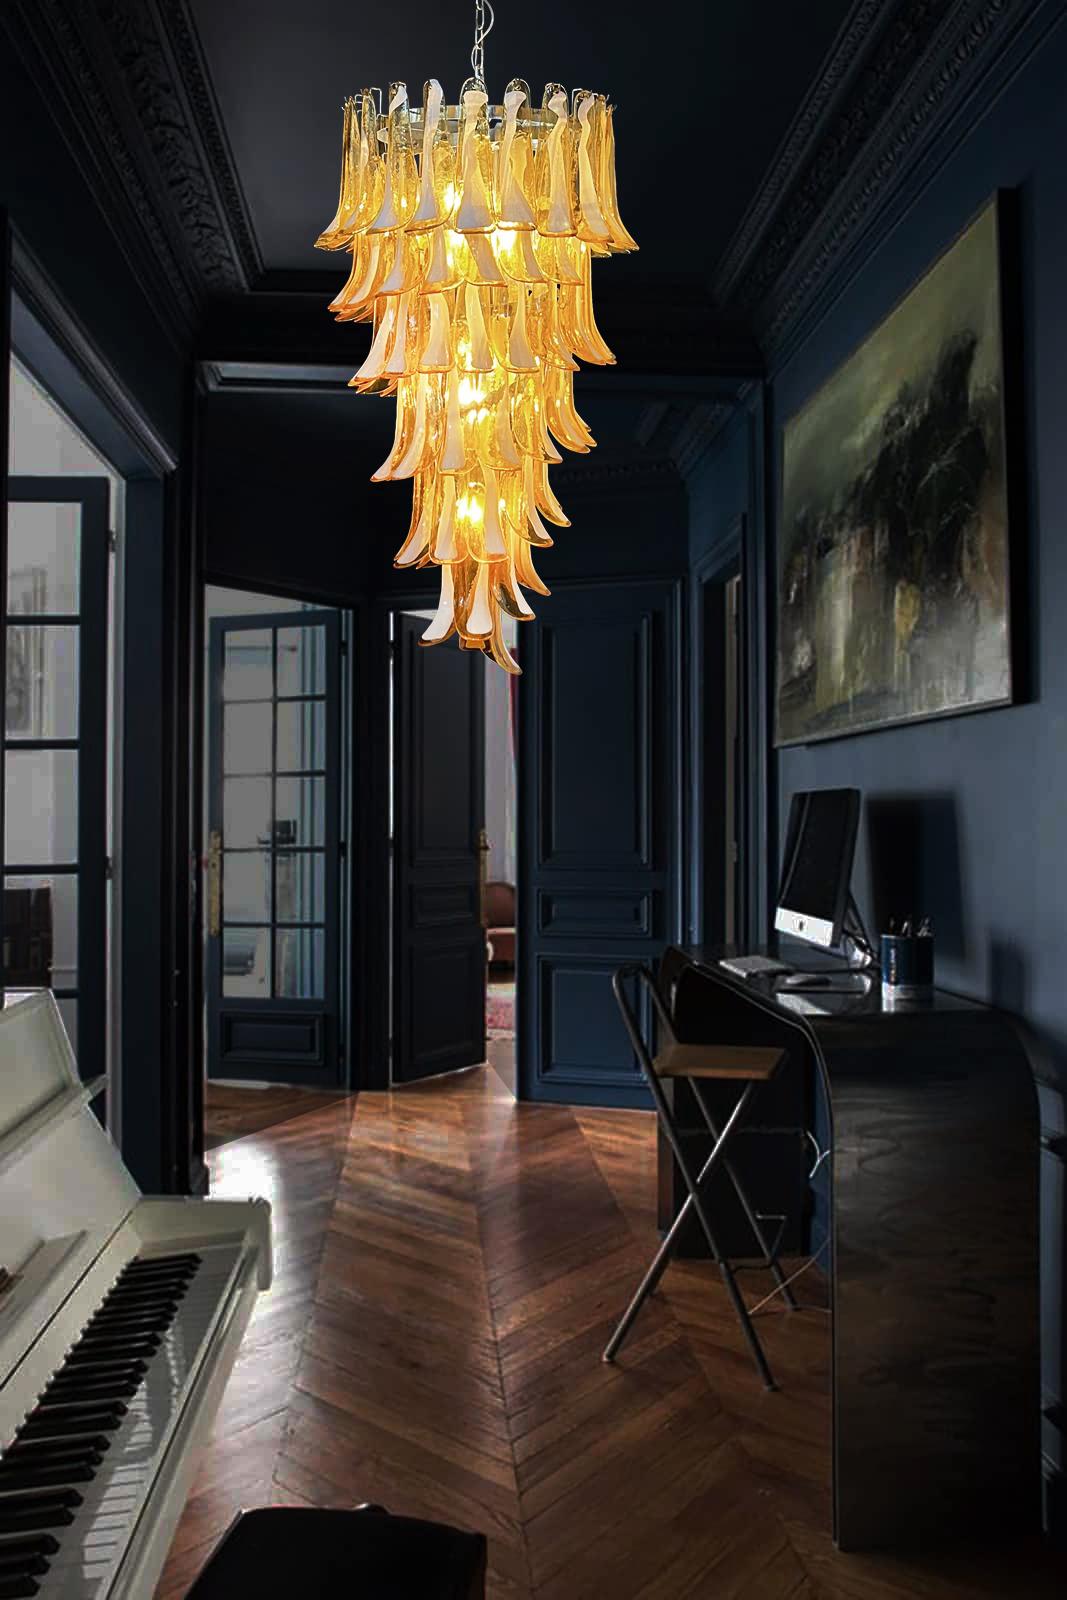 Beautiful and huge Italian Murano Chandelier composed of 83 splendid glass petals (amber with white spot) that give a very elegant look. The glasses of this chandelier are real works of art. The glasses descend with a spiral shape.
Dimensions: